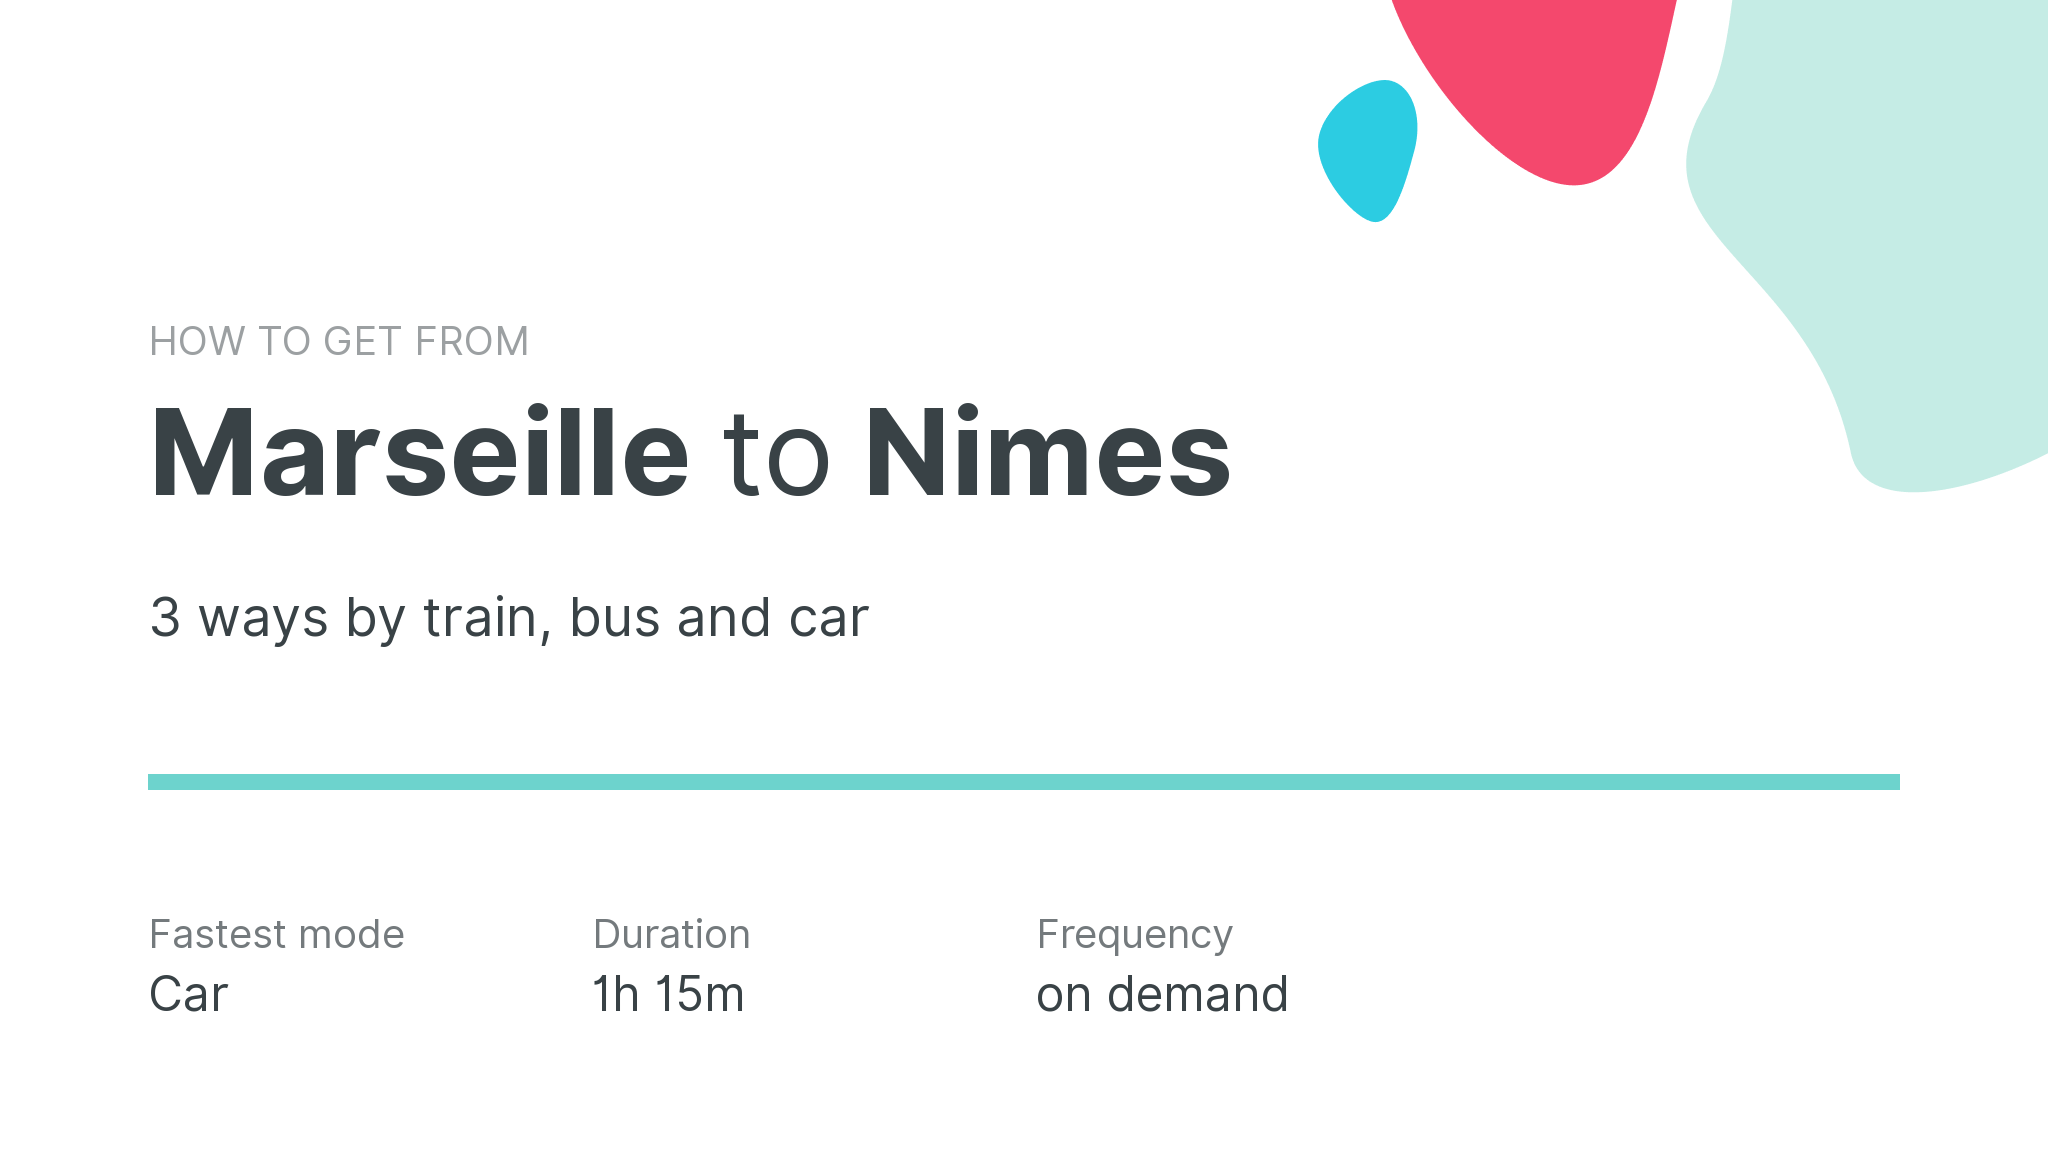 How do I get from Marseille to Nimes